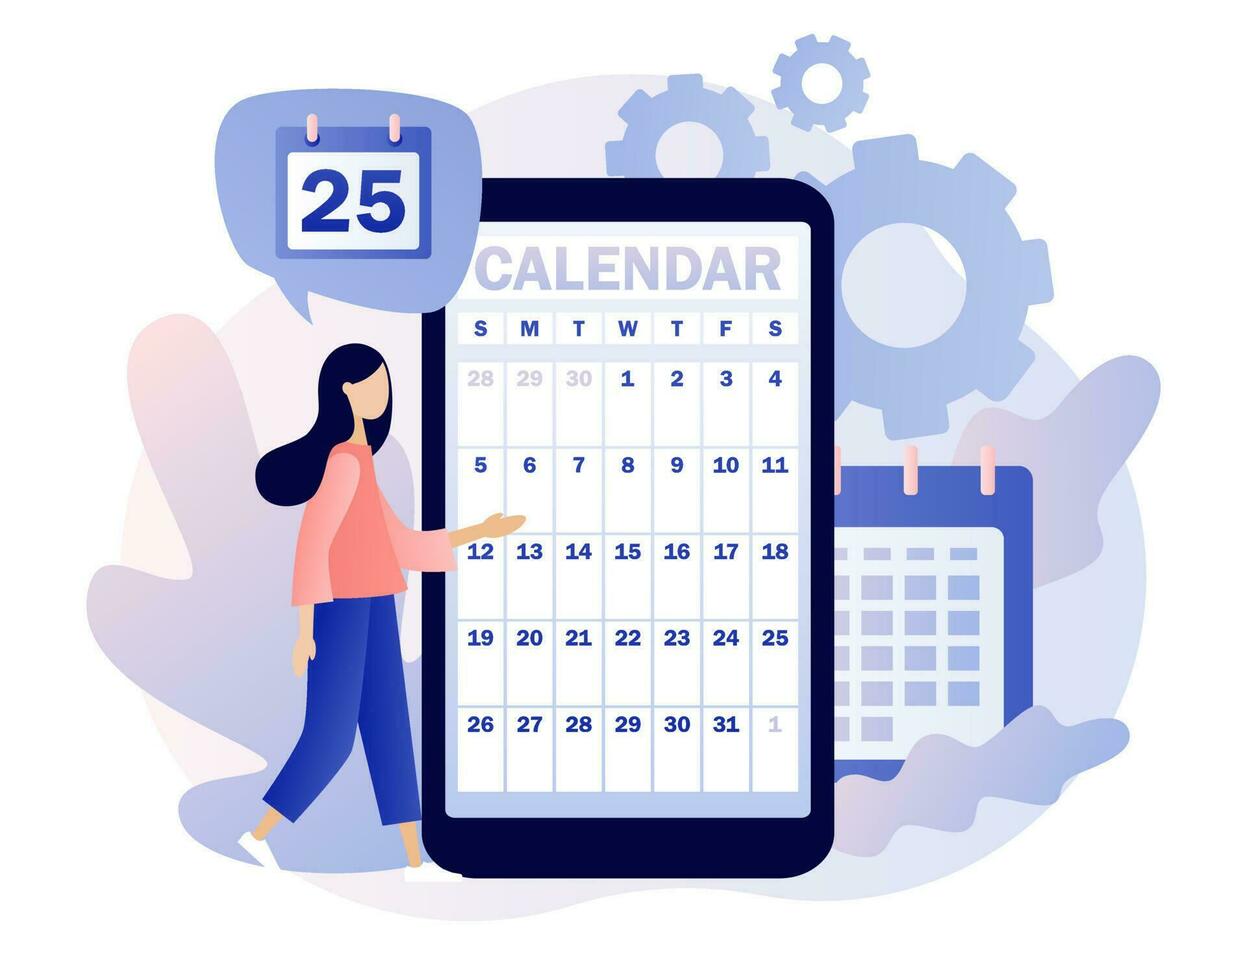 Calendar app. Schedule concept. Time management, business planning, timetable. Modern flat cartoon style. Vector illustration on white background